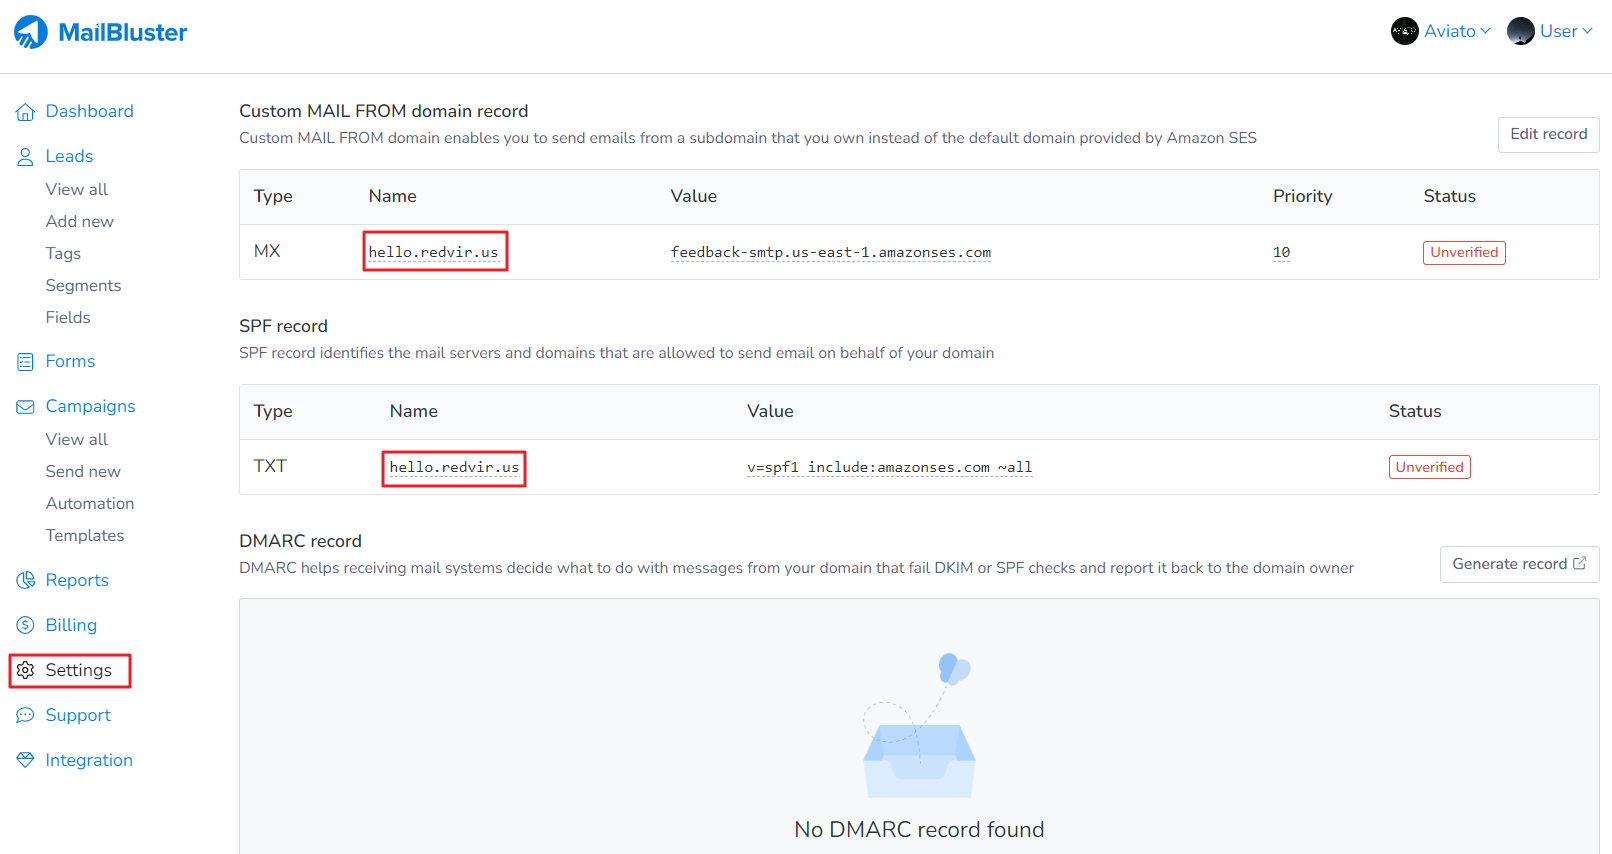 Custom MAIL FROM domain record and SPF record changed to the new subdomain